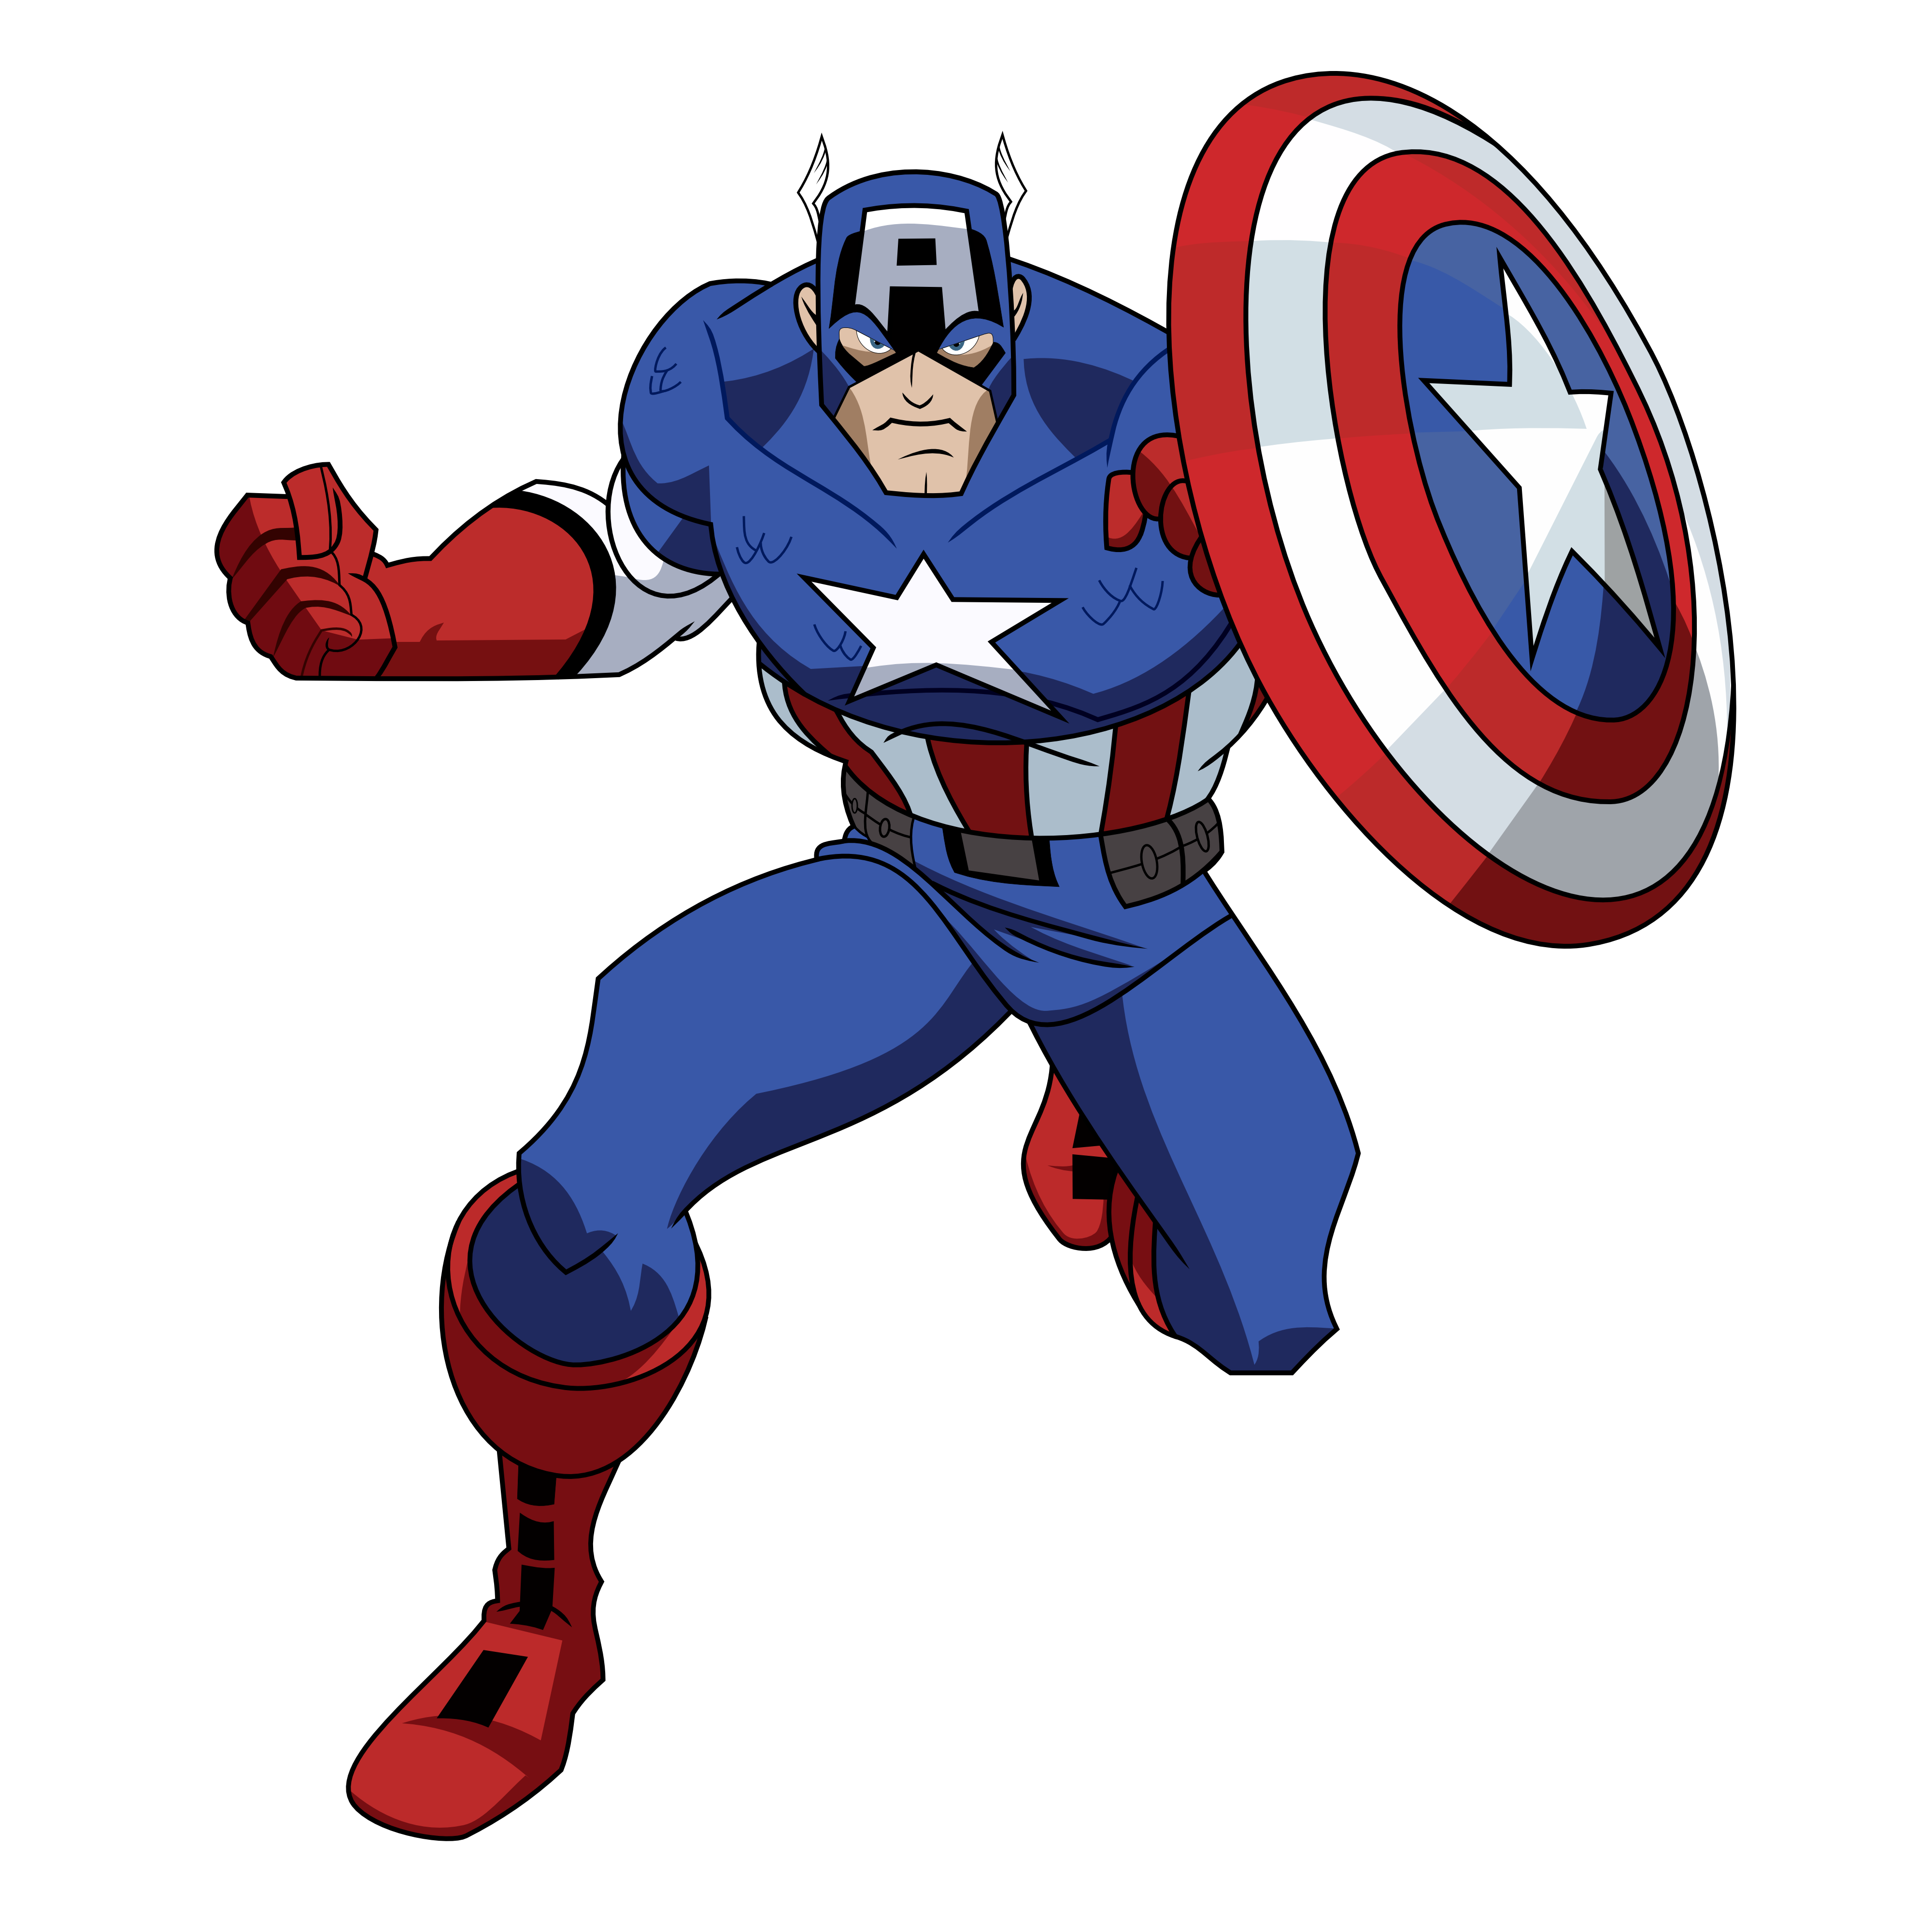 14 cliparts for free. Download Avengers clipart action figure and.